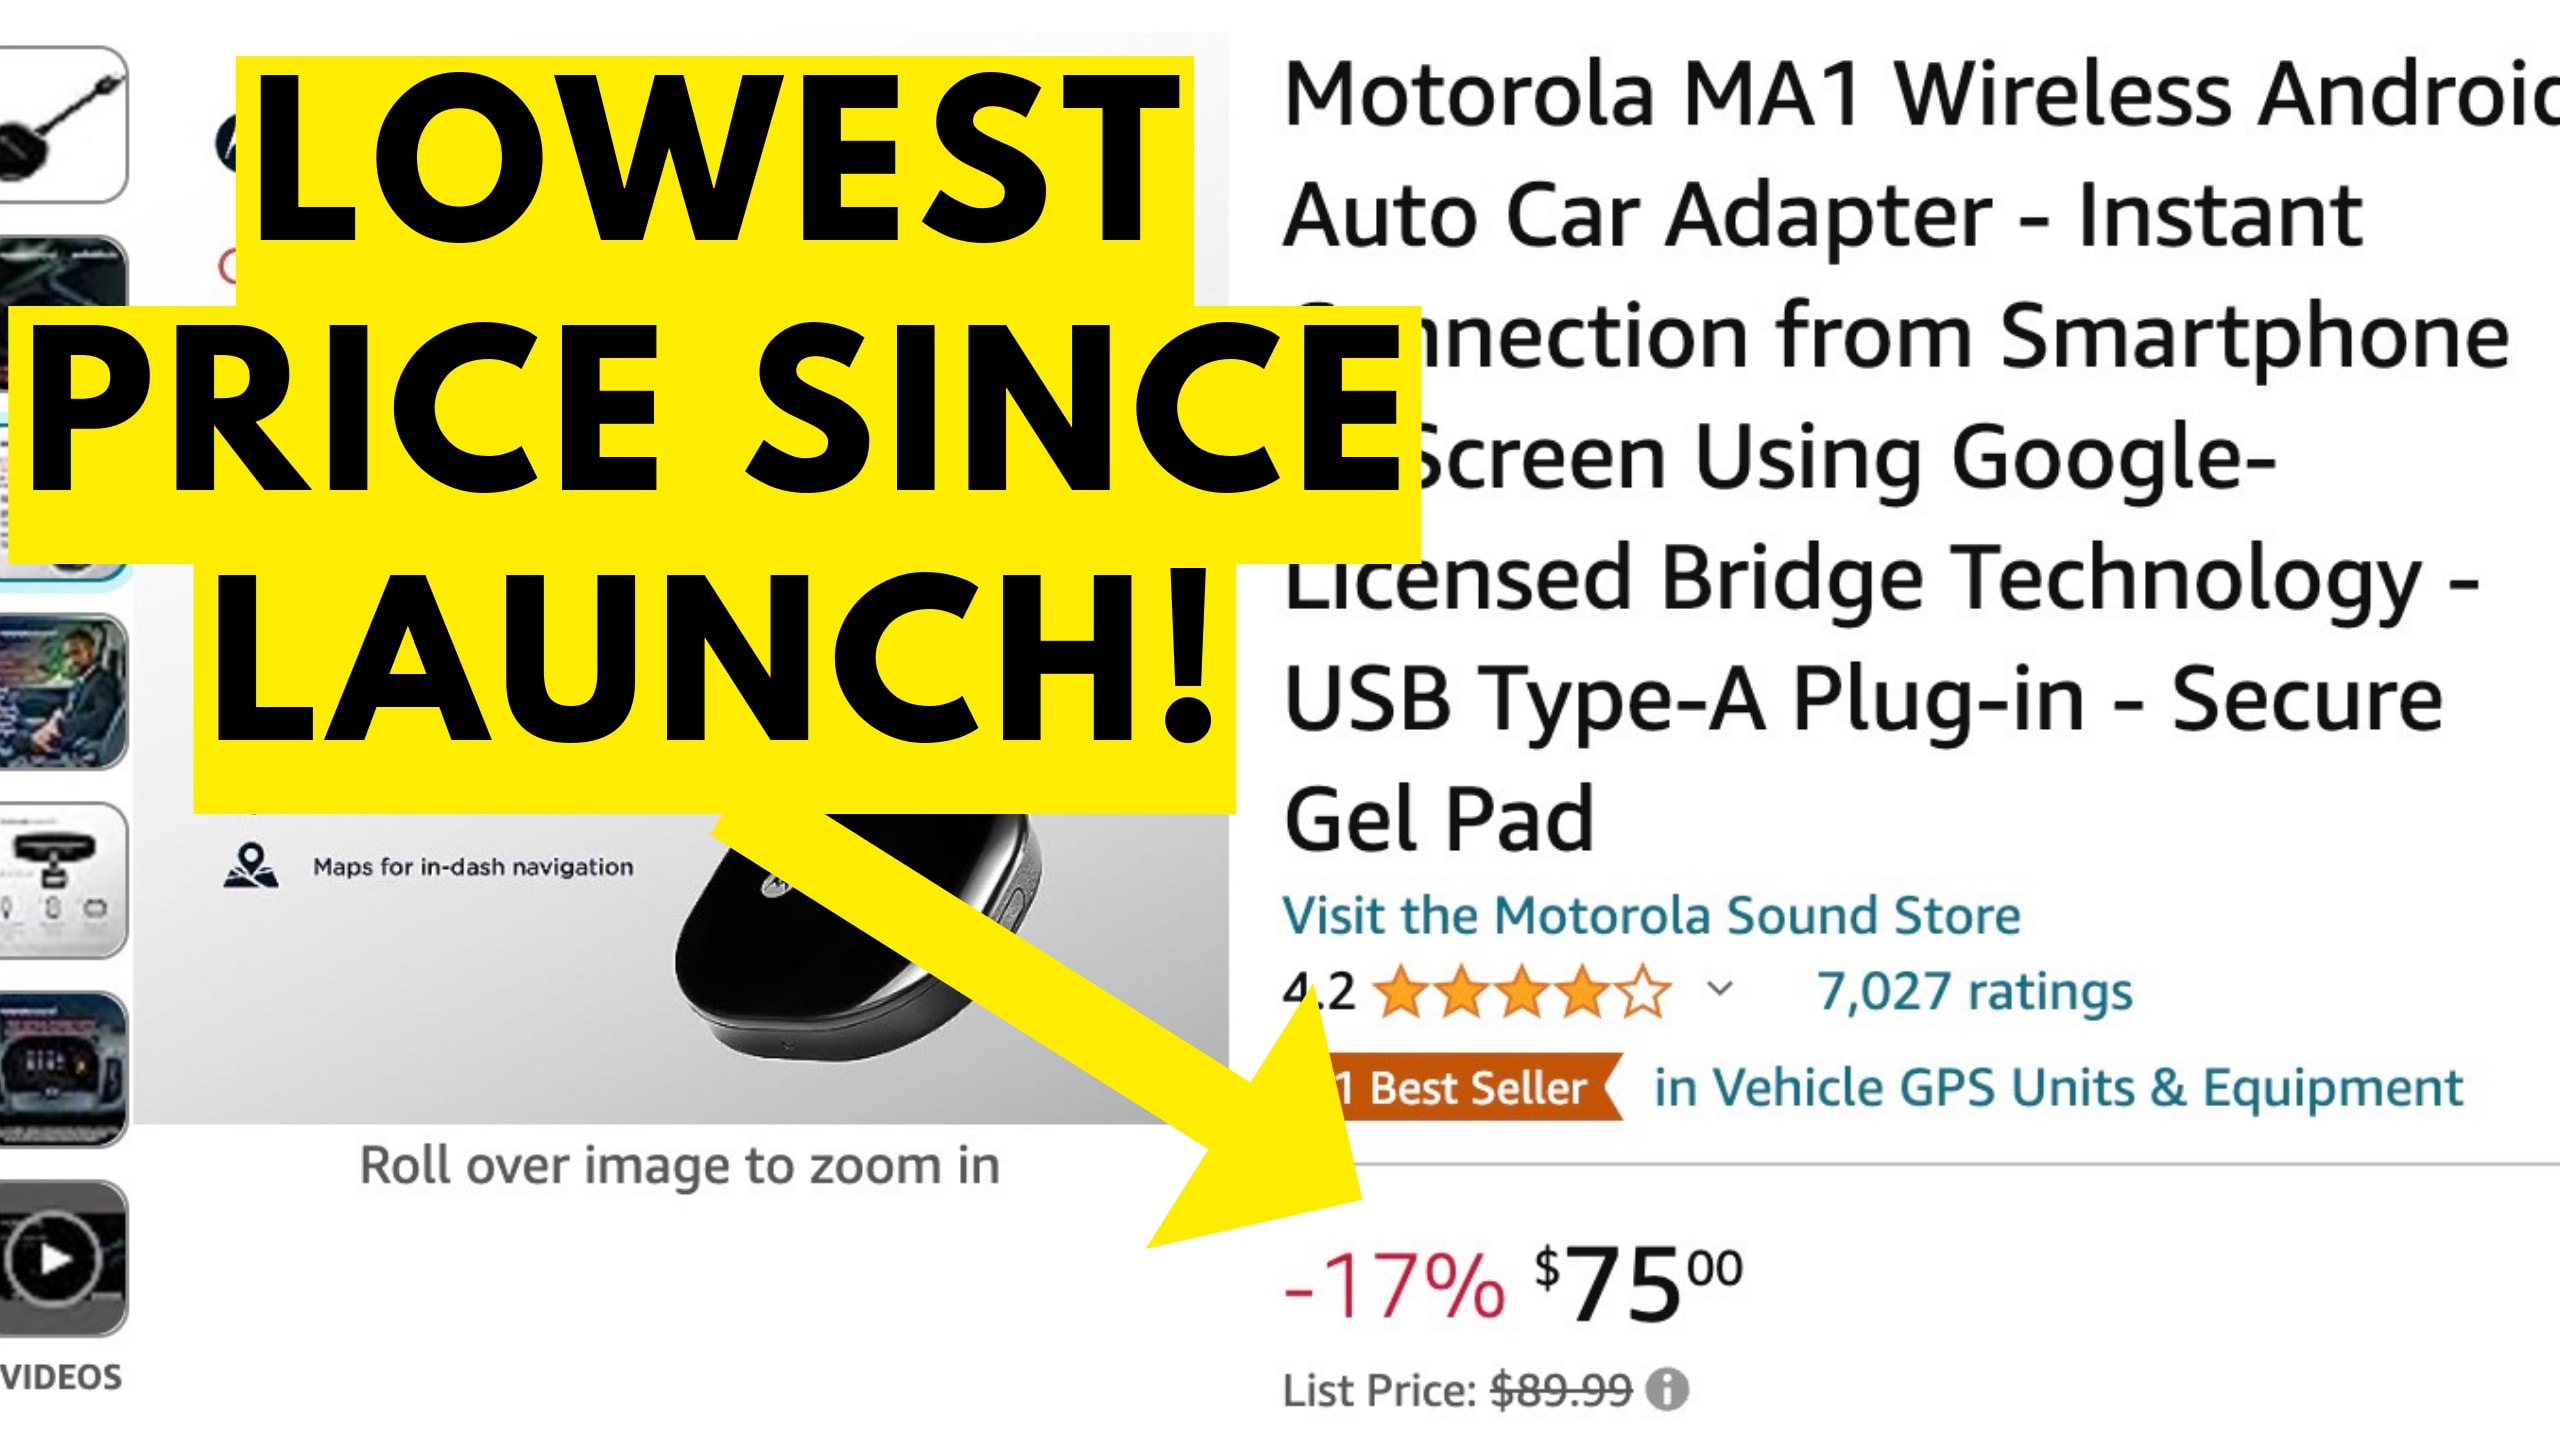 Top Android Auto Wireless Adapter Now Significantly Cheaper, Lowest Price  Since Launch - autoevolution